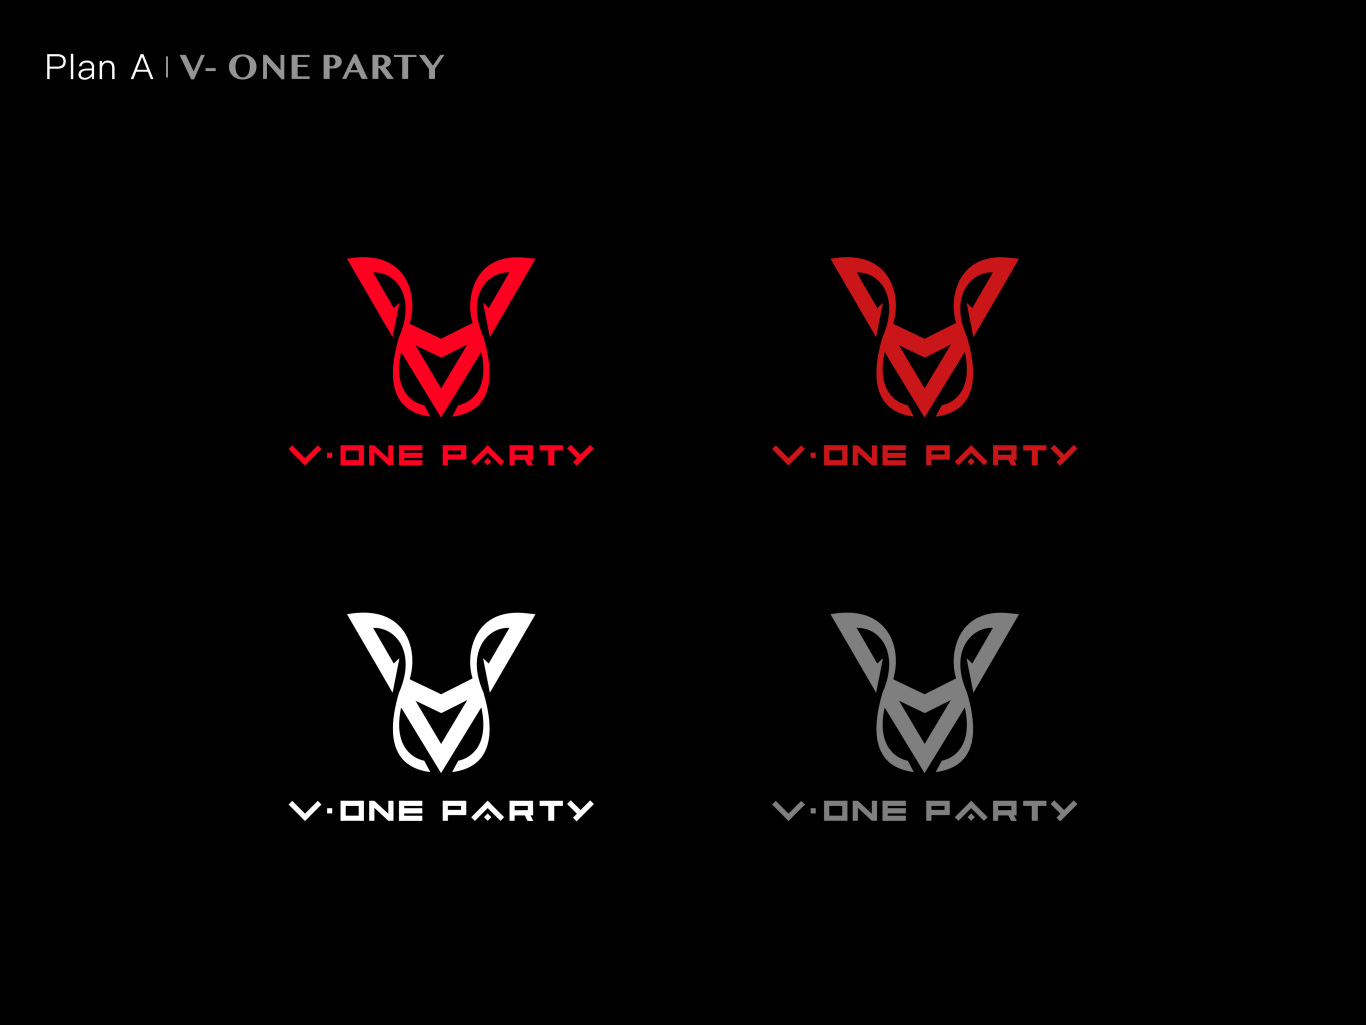 V-ONE PARTY夜店品牌图8